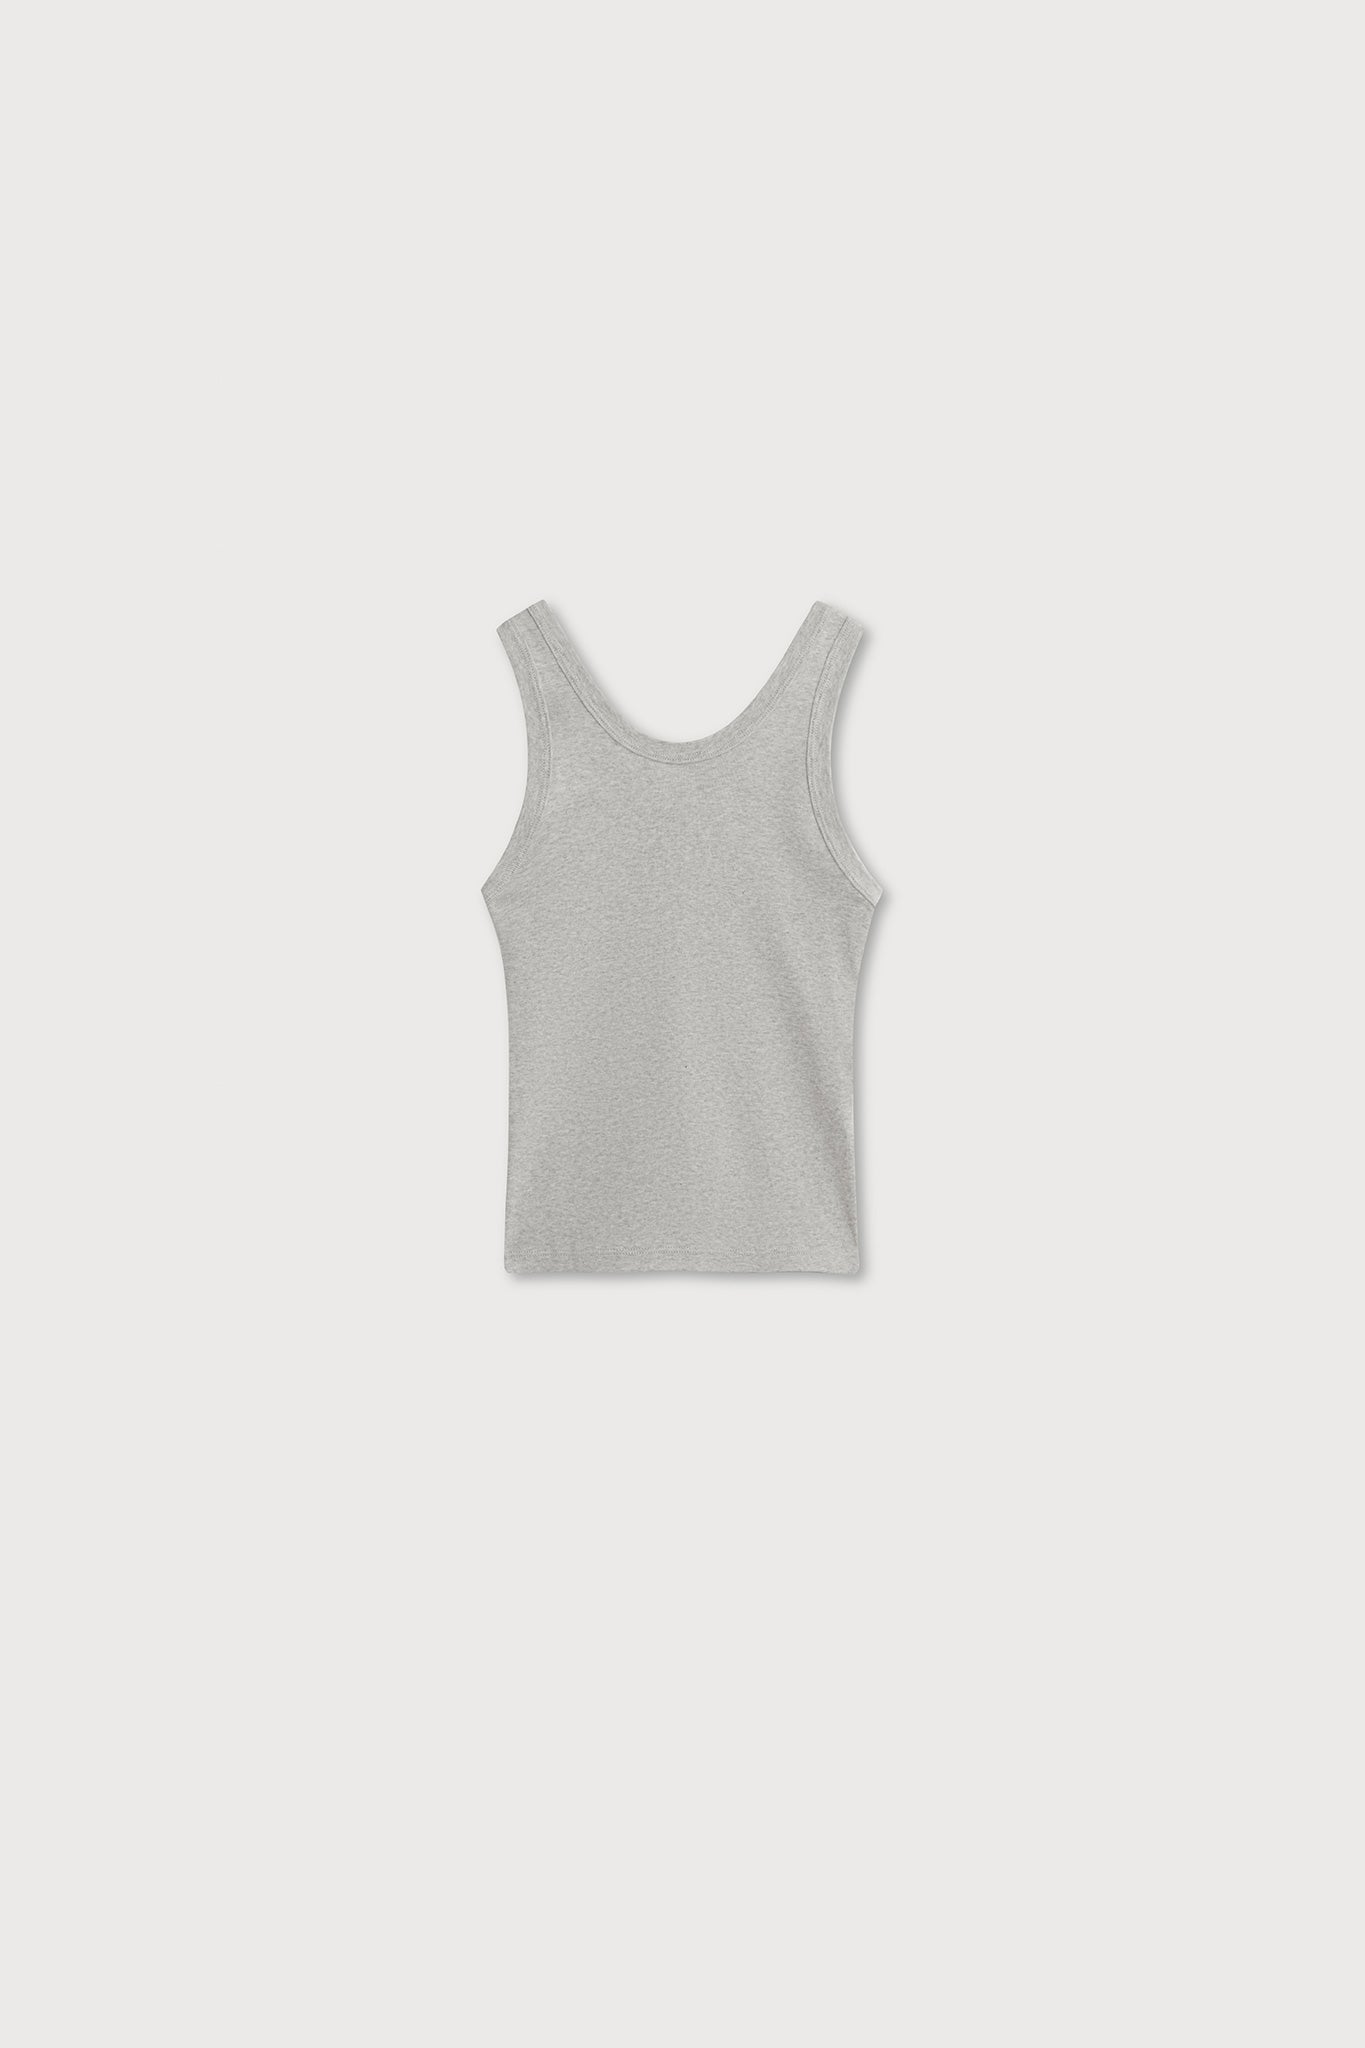 A.BCH A.44 Grey Marle Classic Tank in Organic Cotton